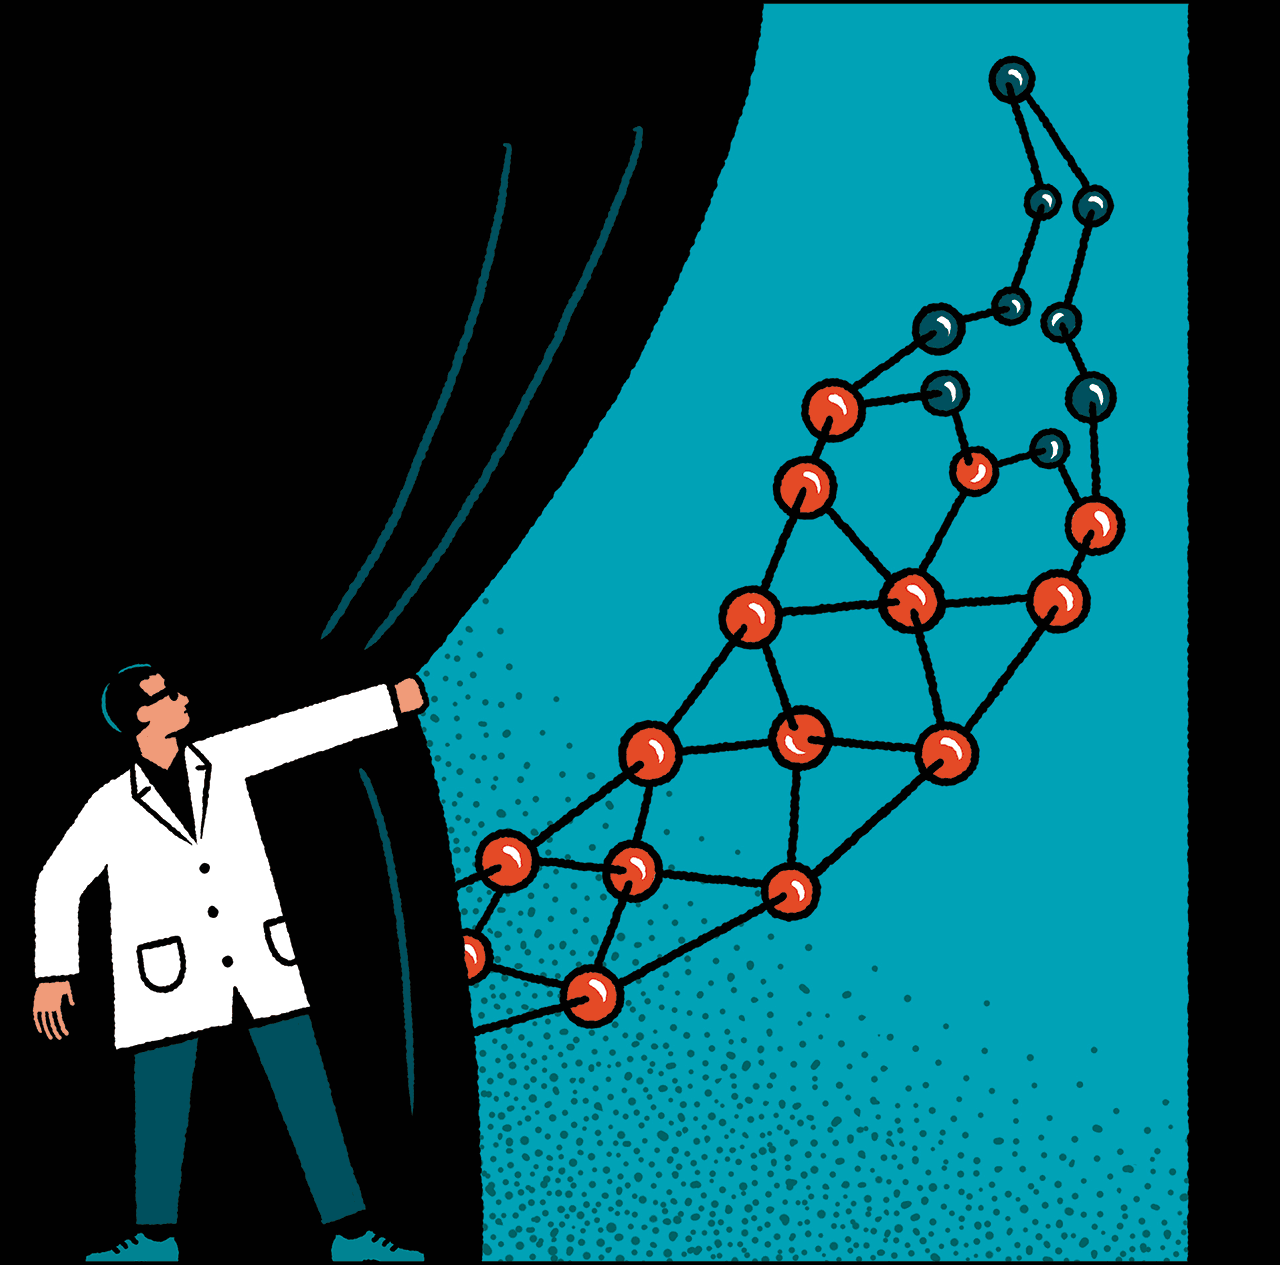 Illustration of a scientist pulling back a curtain to reveal a chili pepper made out of molecules.